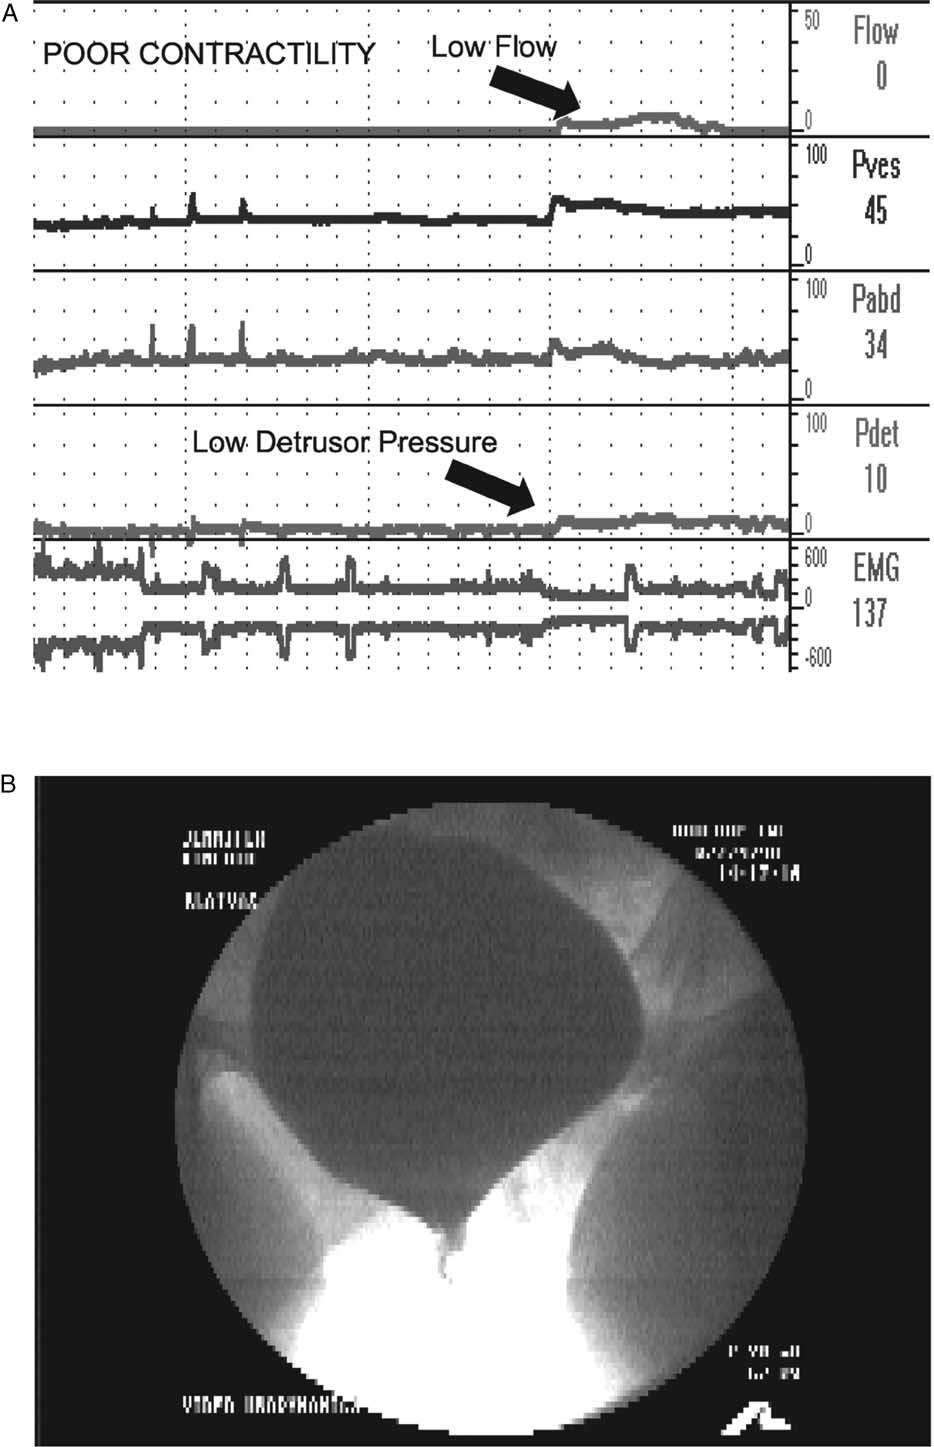 FIGURE 6. Involuntary detrusor contraction in a woman with impaired detrusor contractility.